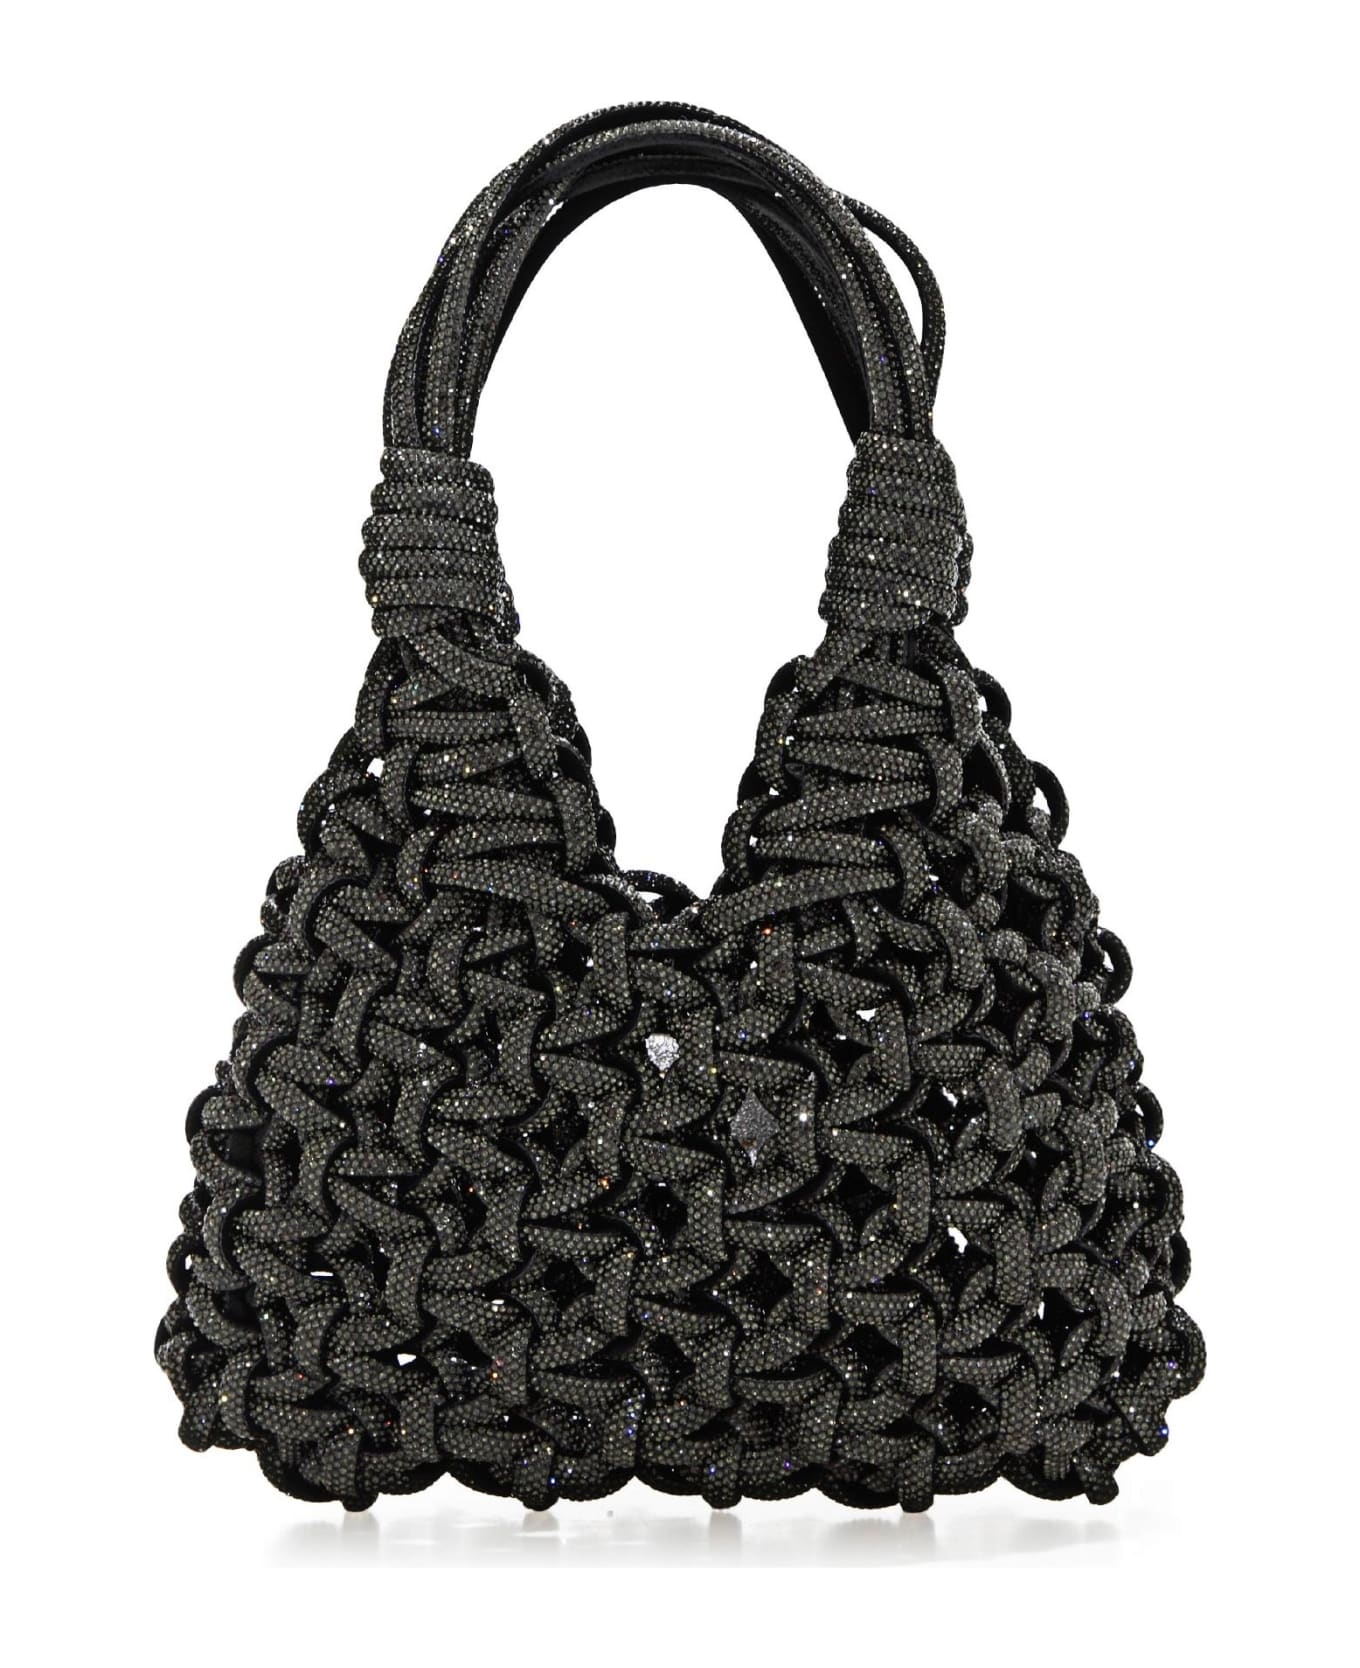 Hibourama Jewel Bag With Weaving And Applied Crystals - Black トートバッグ